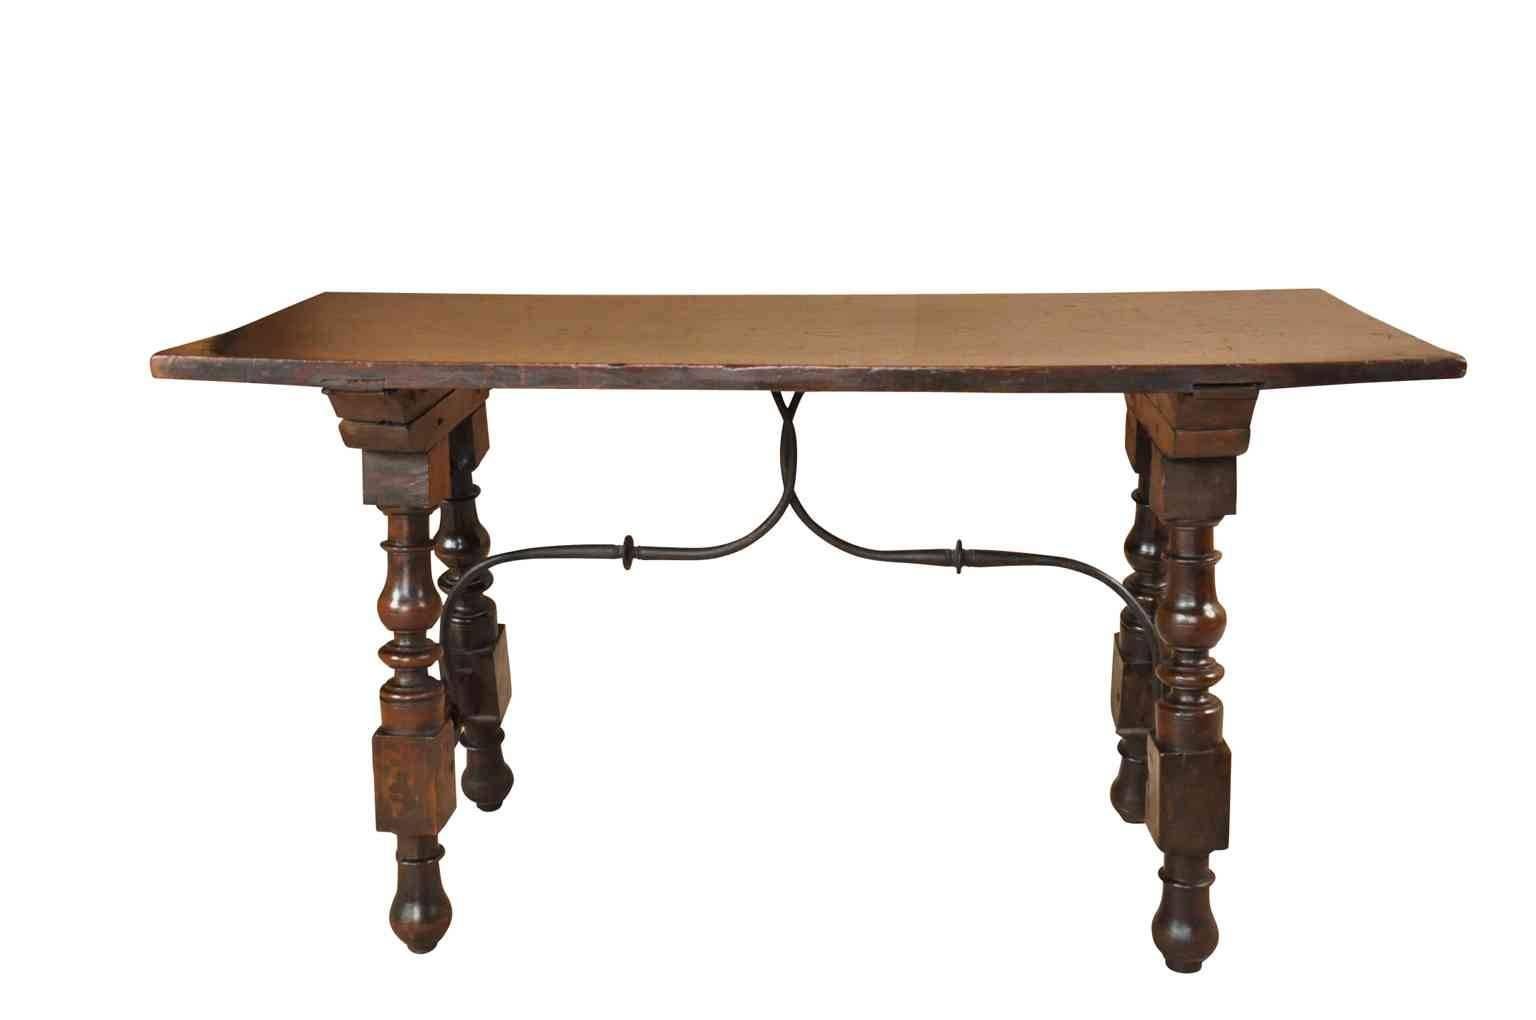 A very beautiful 18th century diminutive side table or console from the Catalan region of Spain. Wonderfully constructed from walnut with a solid board top, nicely turned legs and hand-forged iron stretchers.